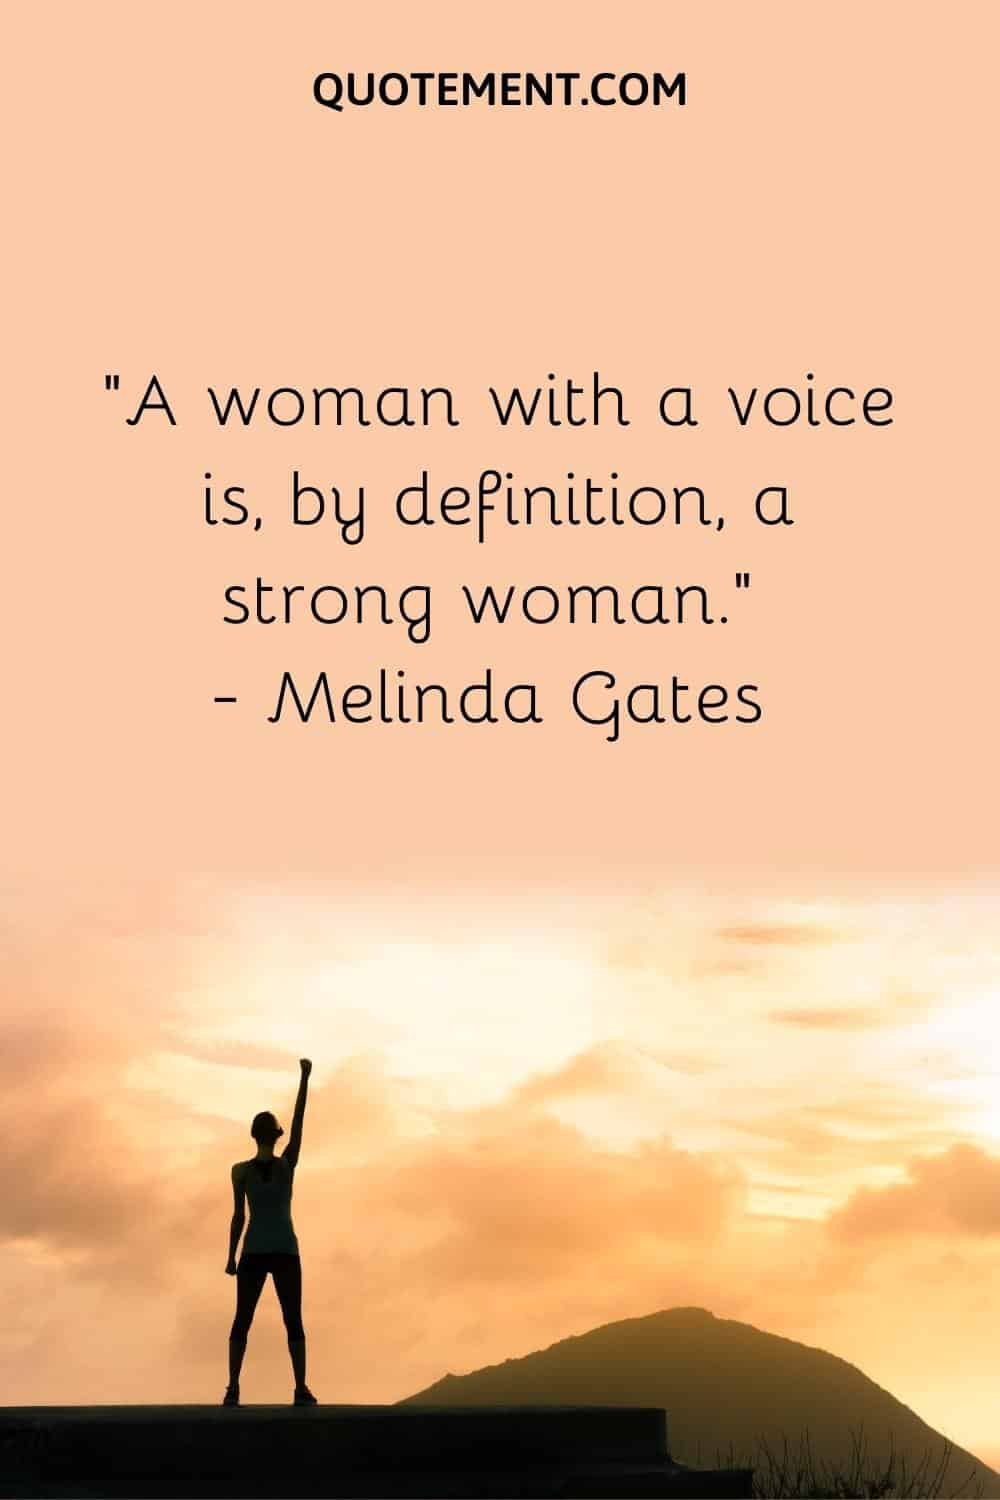 A woman with a voice is, by definition, a strong woman